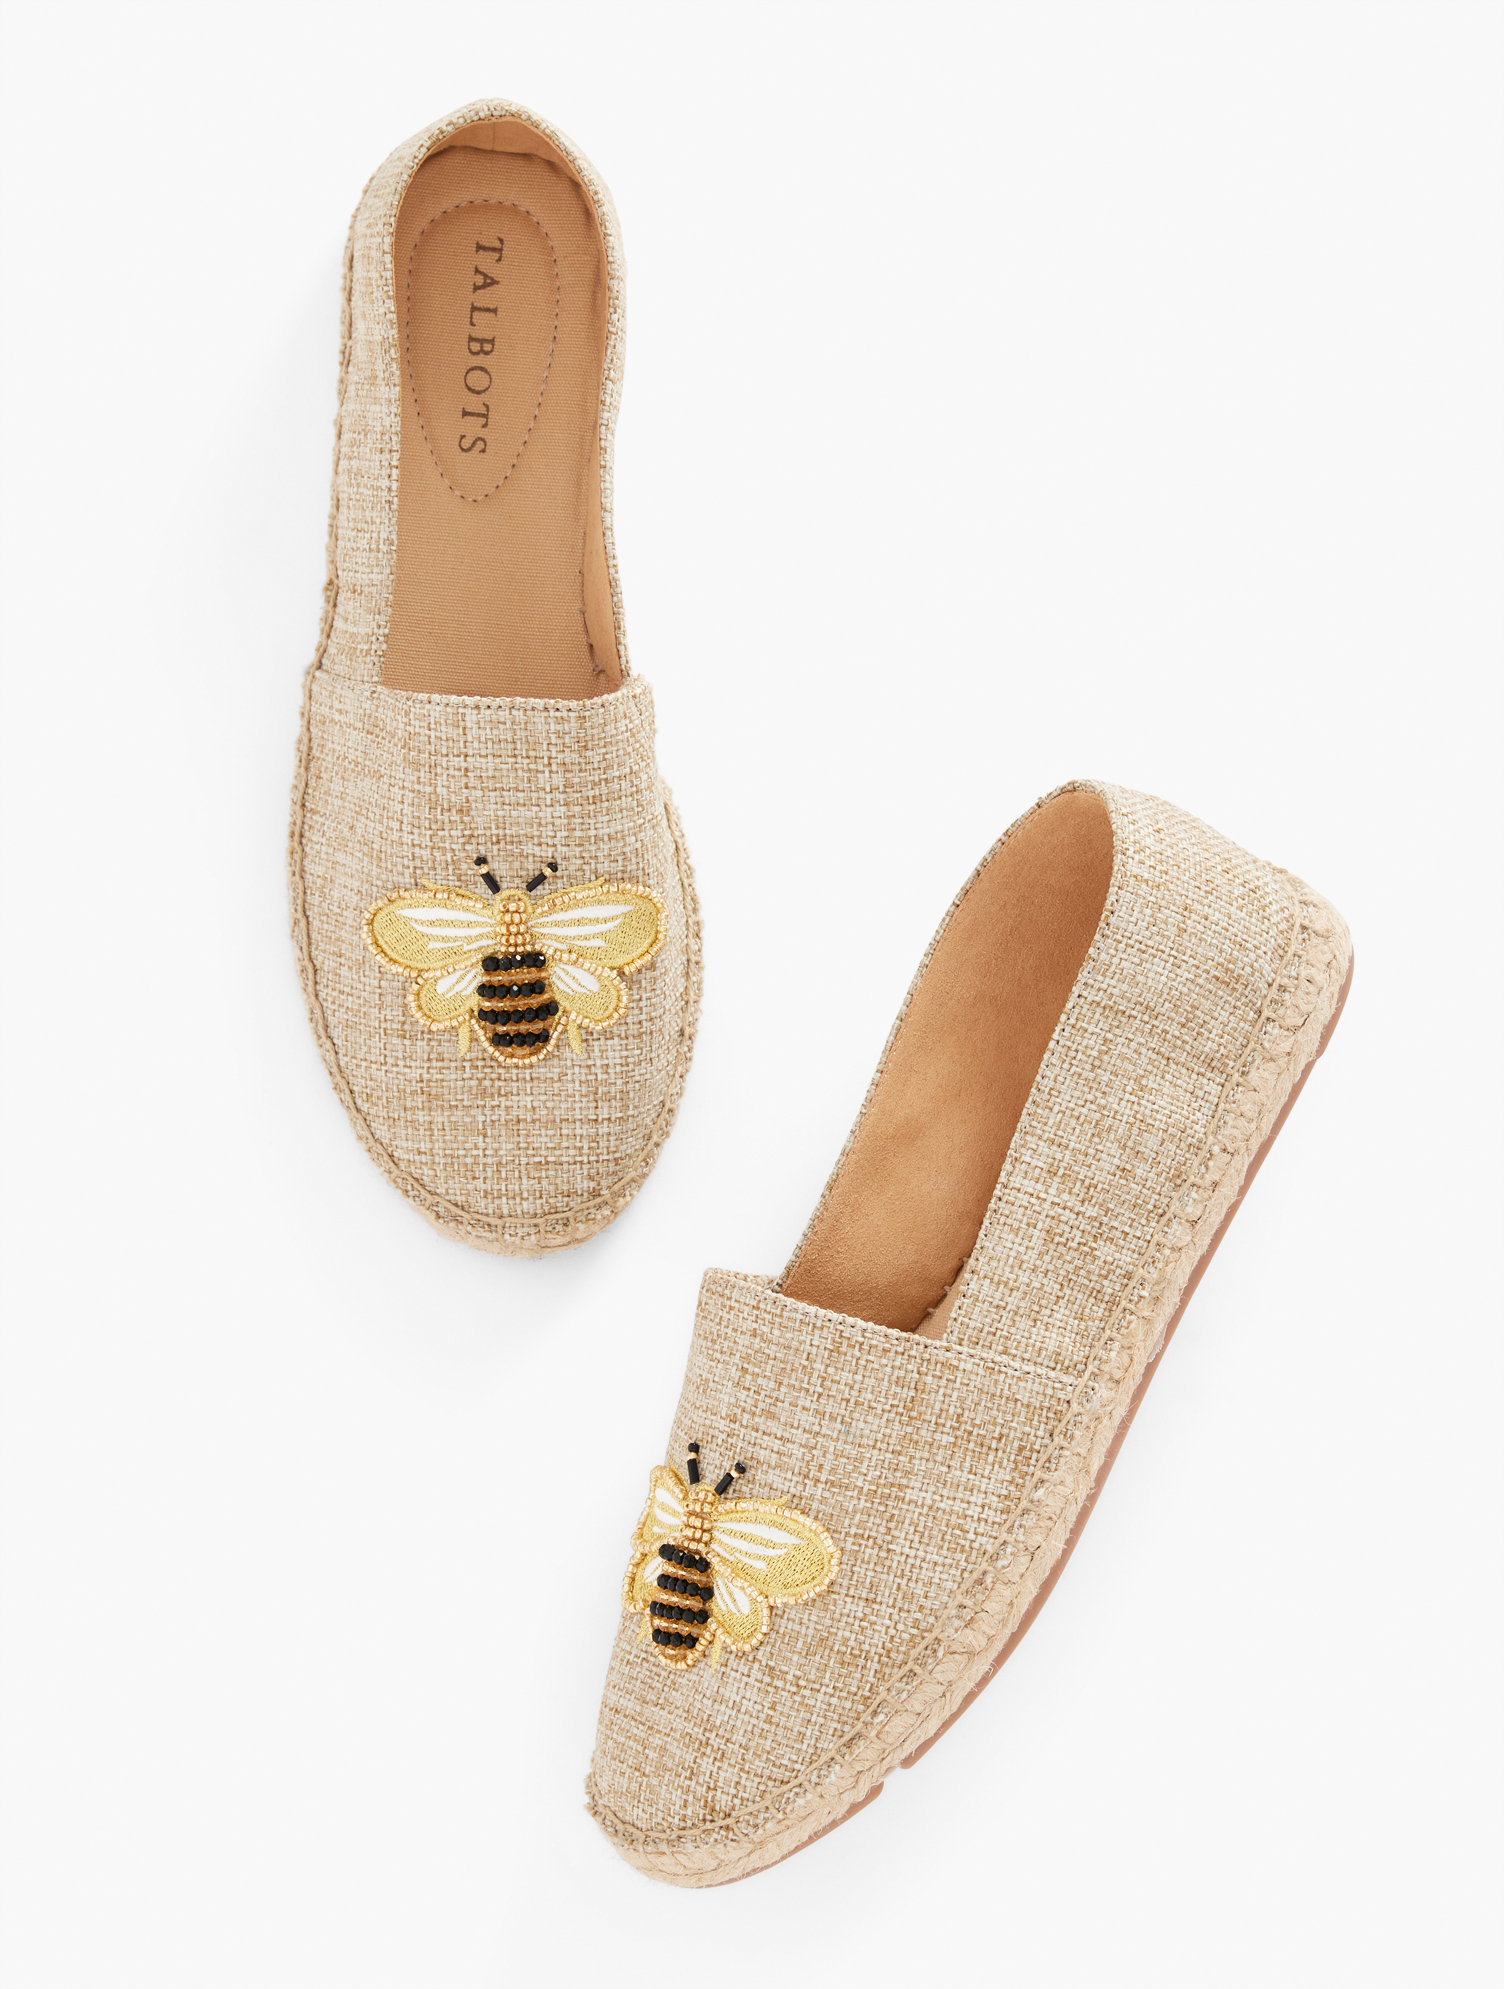 Talbots Izzy Espadrille Flats - Beaded Bee - Natural - 9m - 100% Cotton